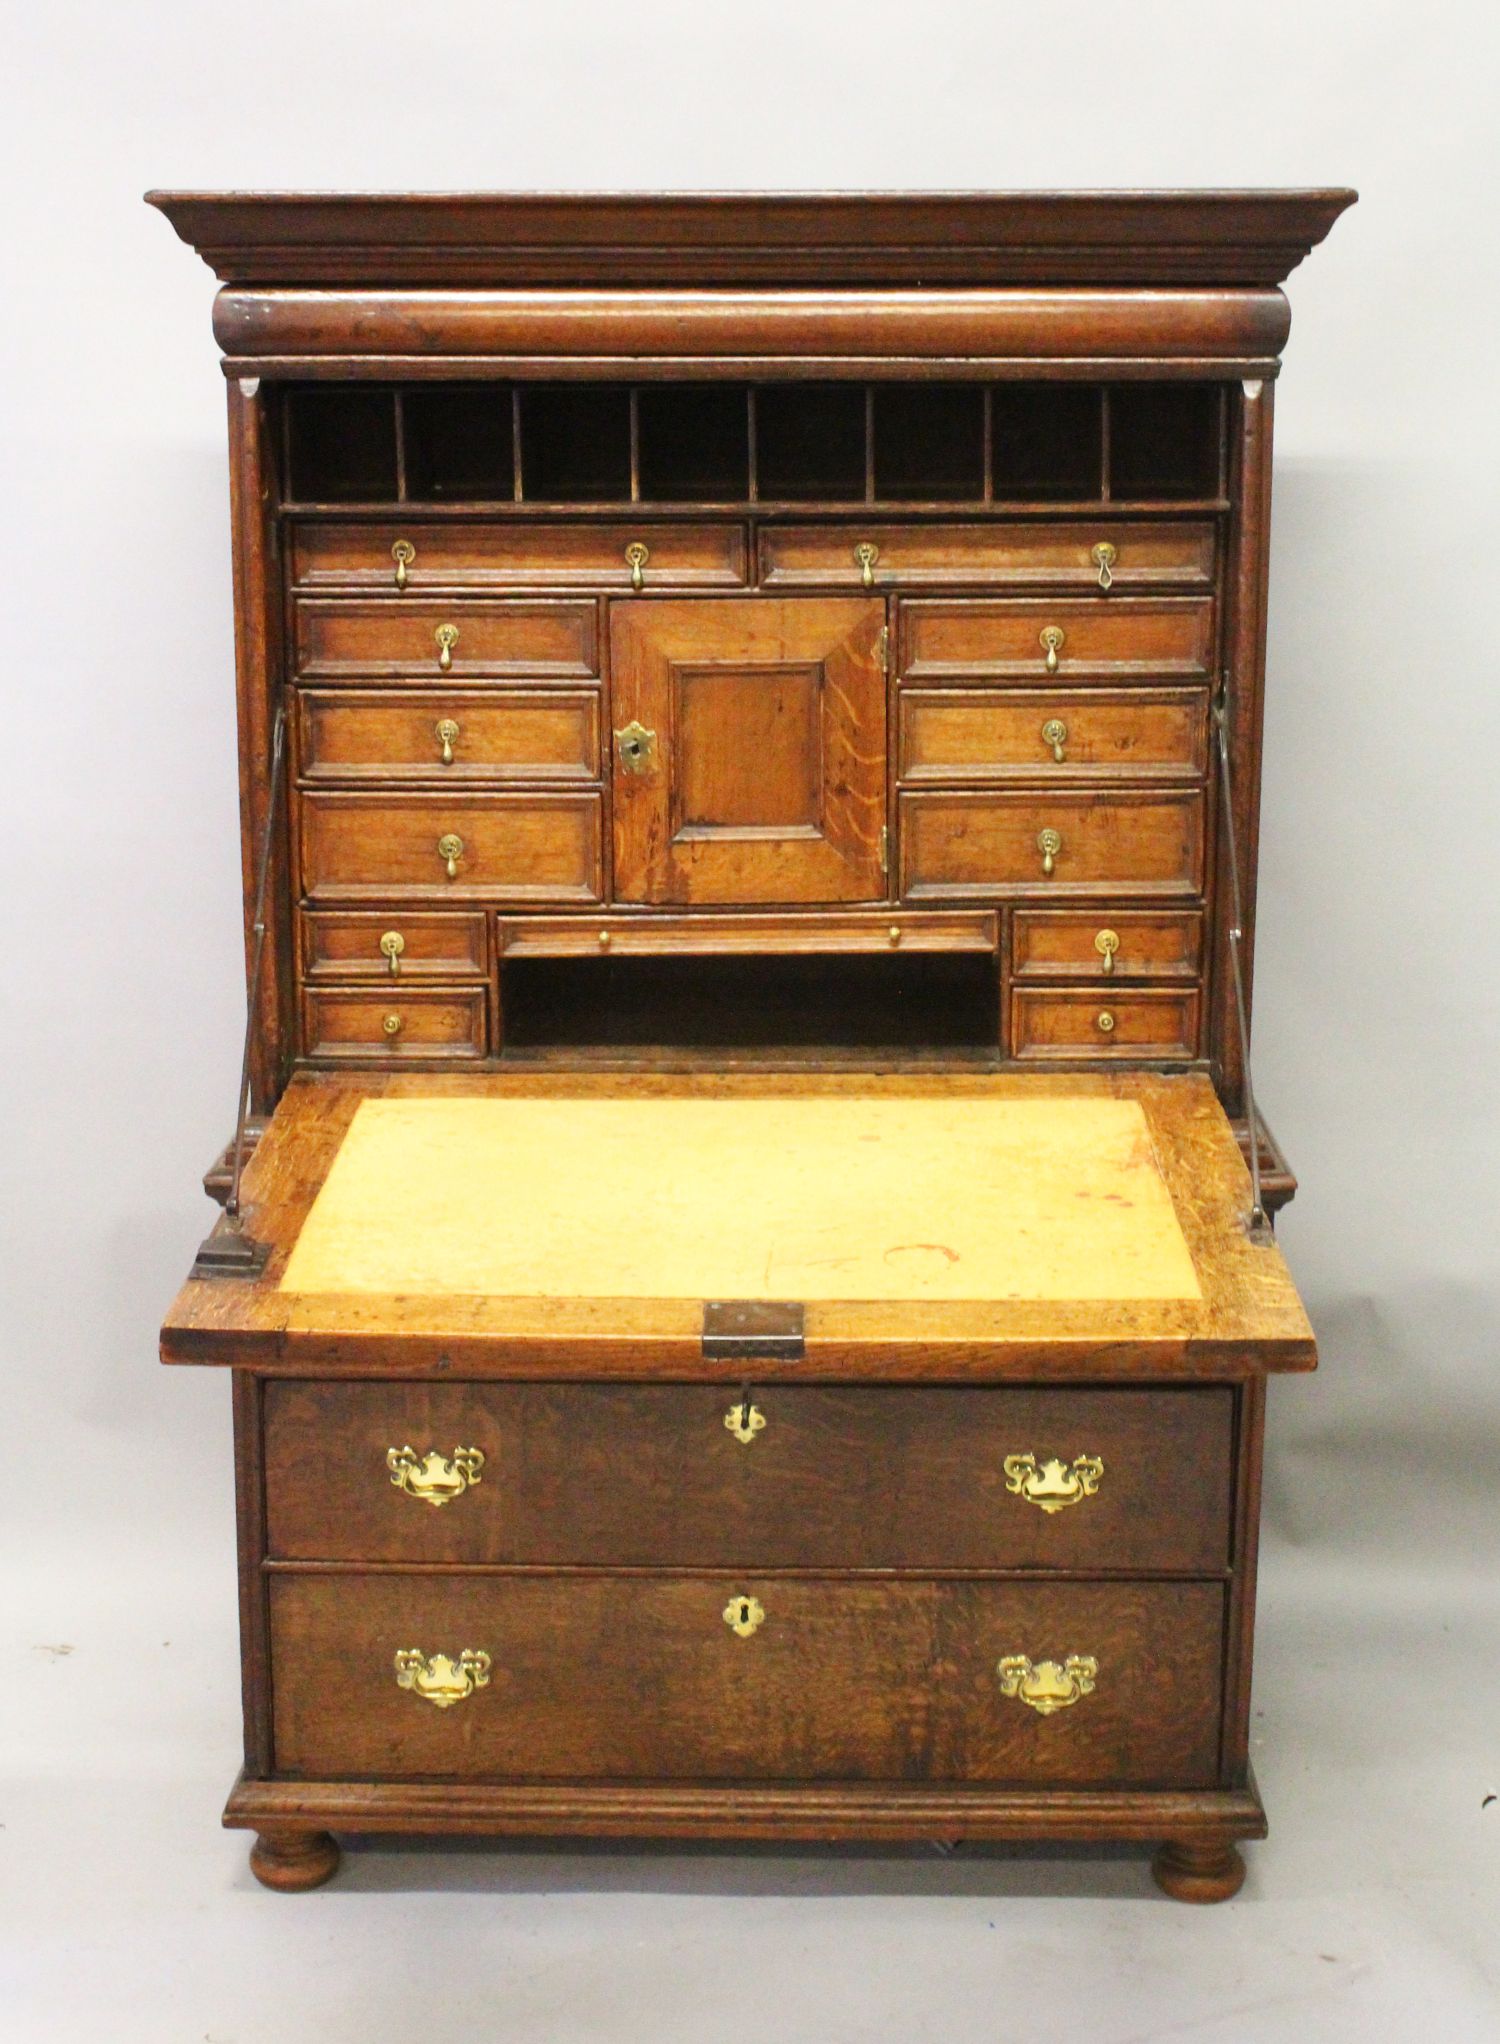 AN 18TH CENTURY OAK ESCRITOIRE, with frieze drawer, panelled drop flap opening to reveal a cupboard,